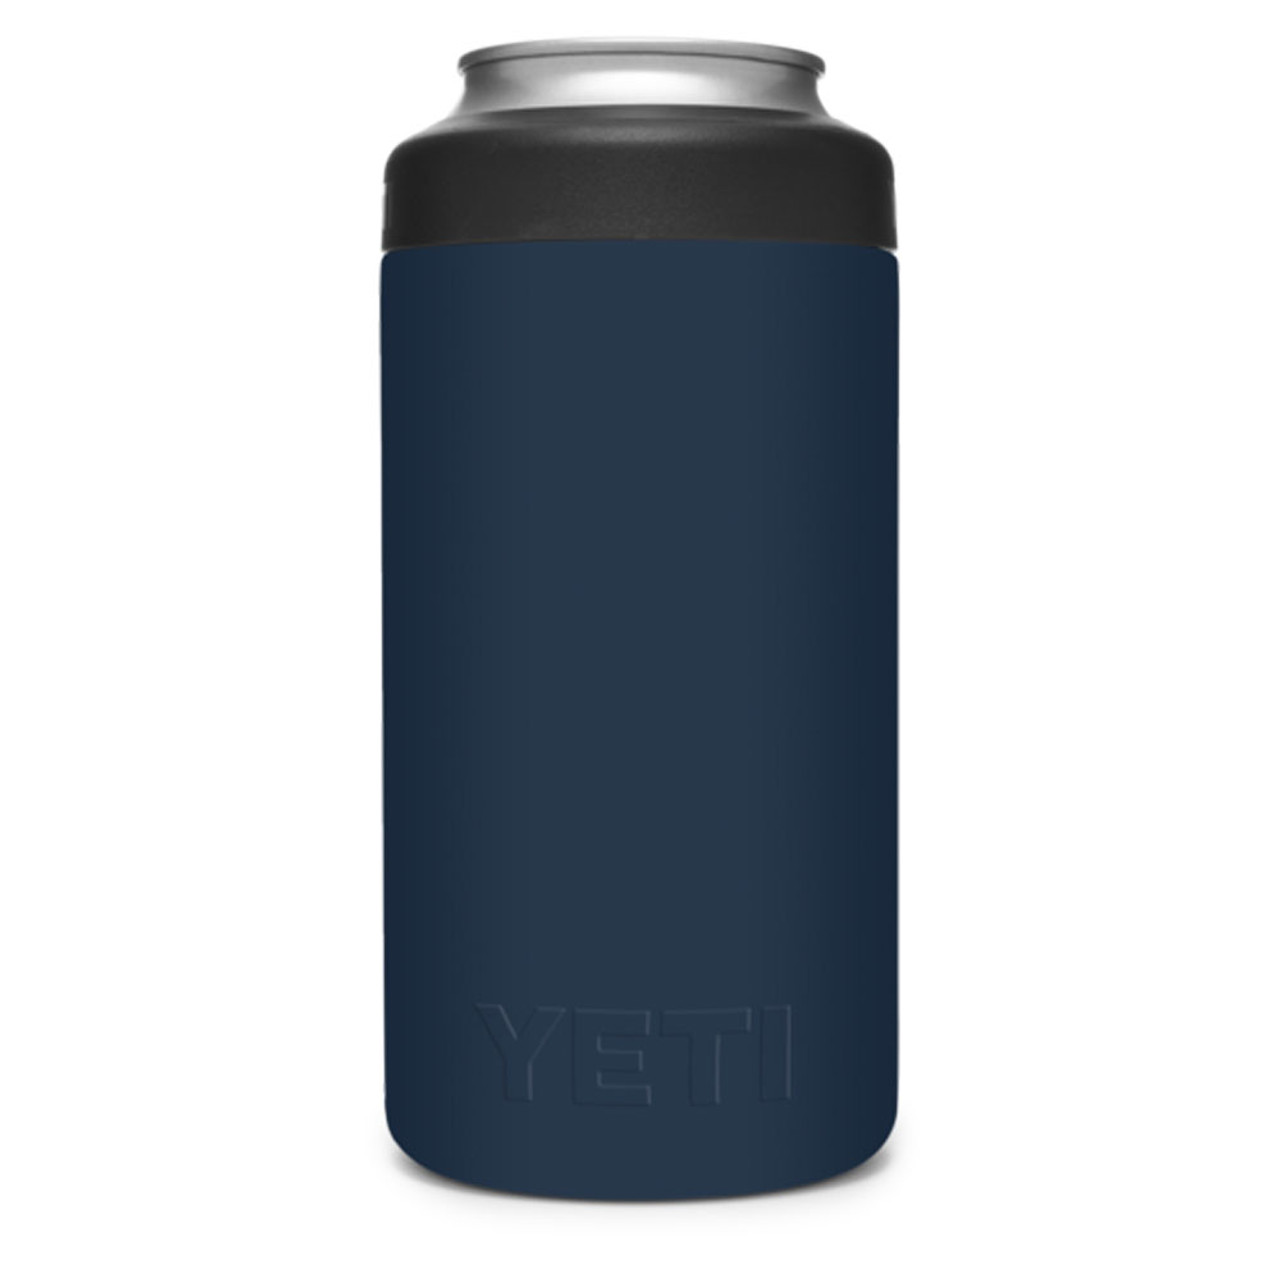 https://cdn11.bigcommerce.com/s-zut1msomd6/images/stencil/1280x1280/products/40340/242035/yeti-rambler-16-oz-colster-tall-can-cooler-21071501590-navy-back__08444.1698417207.jpg?c=1